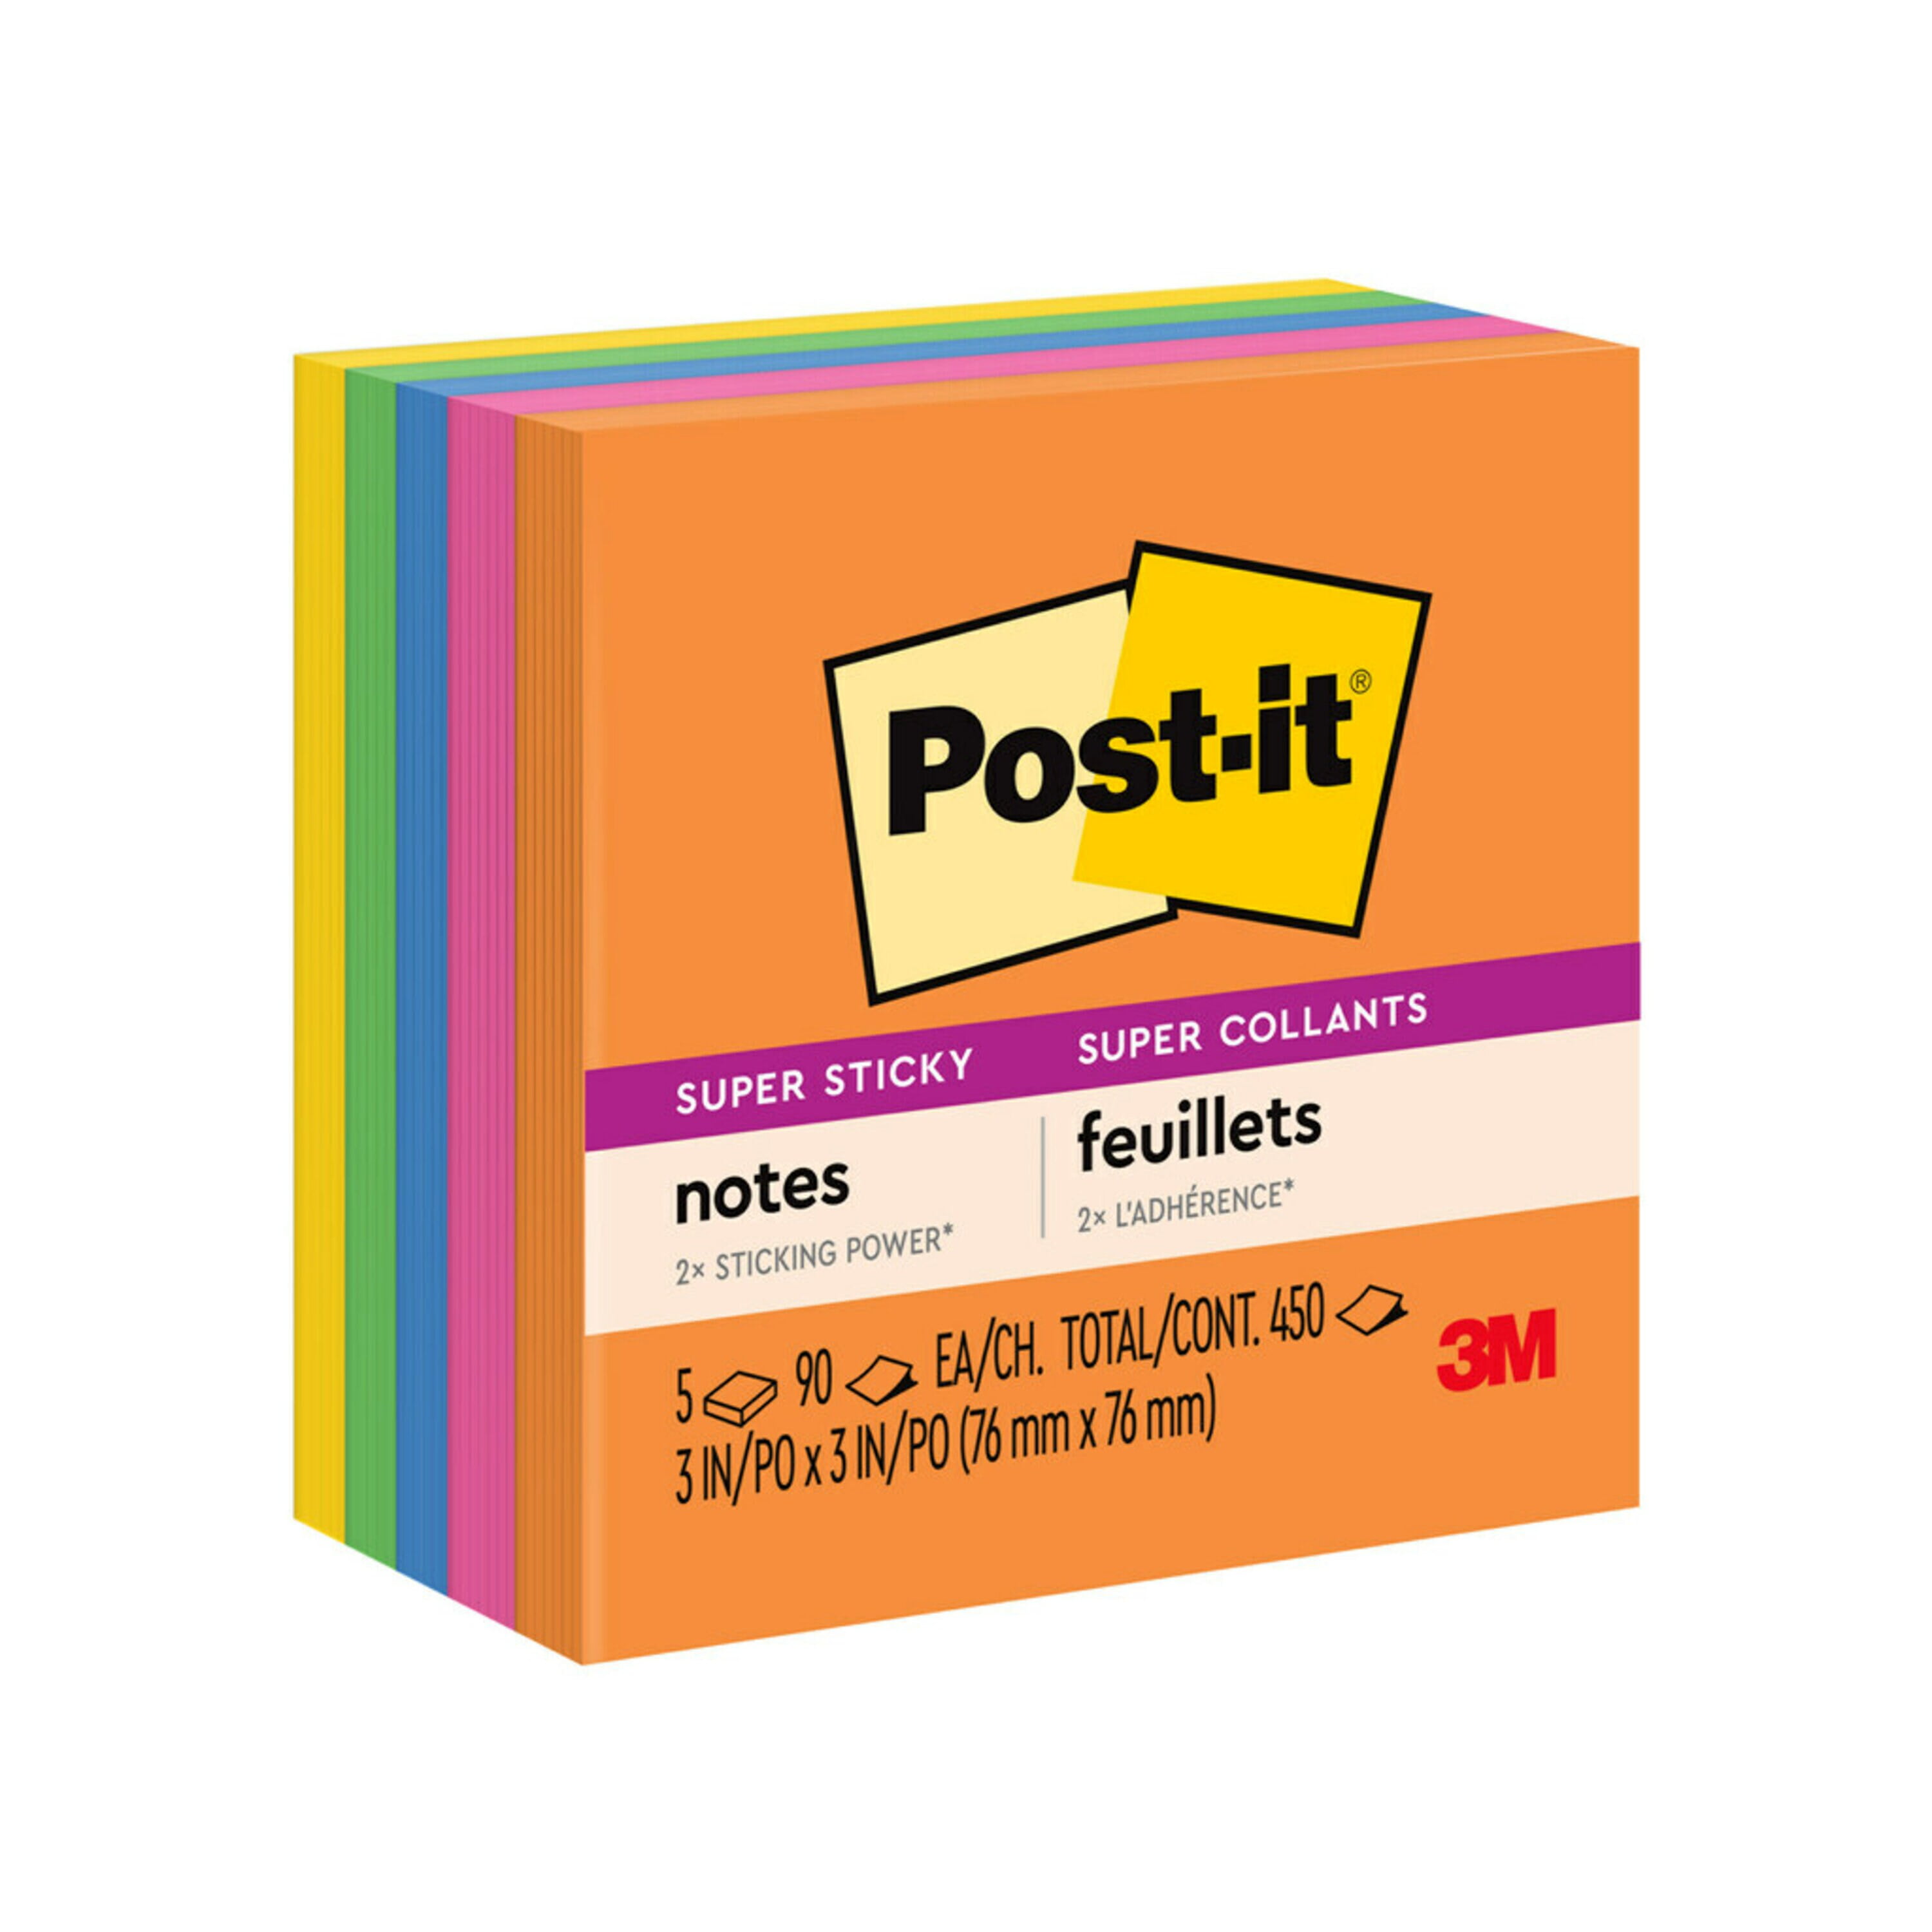 Post-it Notes Cube 3 X 3 Inch Totaling 400 Sheets Blue Pink Orange 2027-pkor for sale online